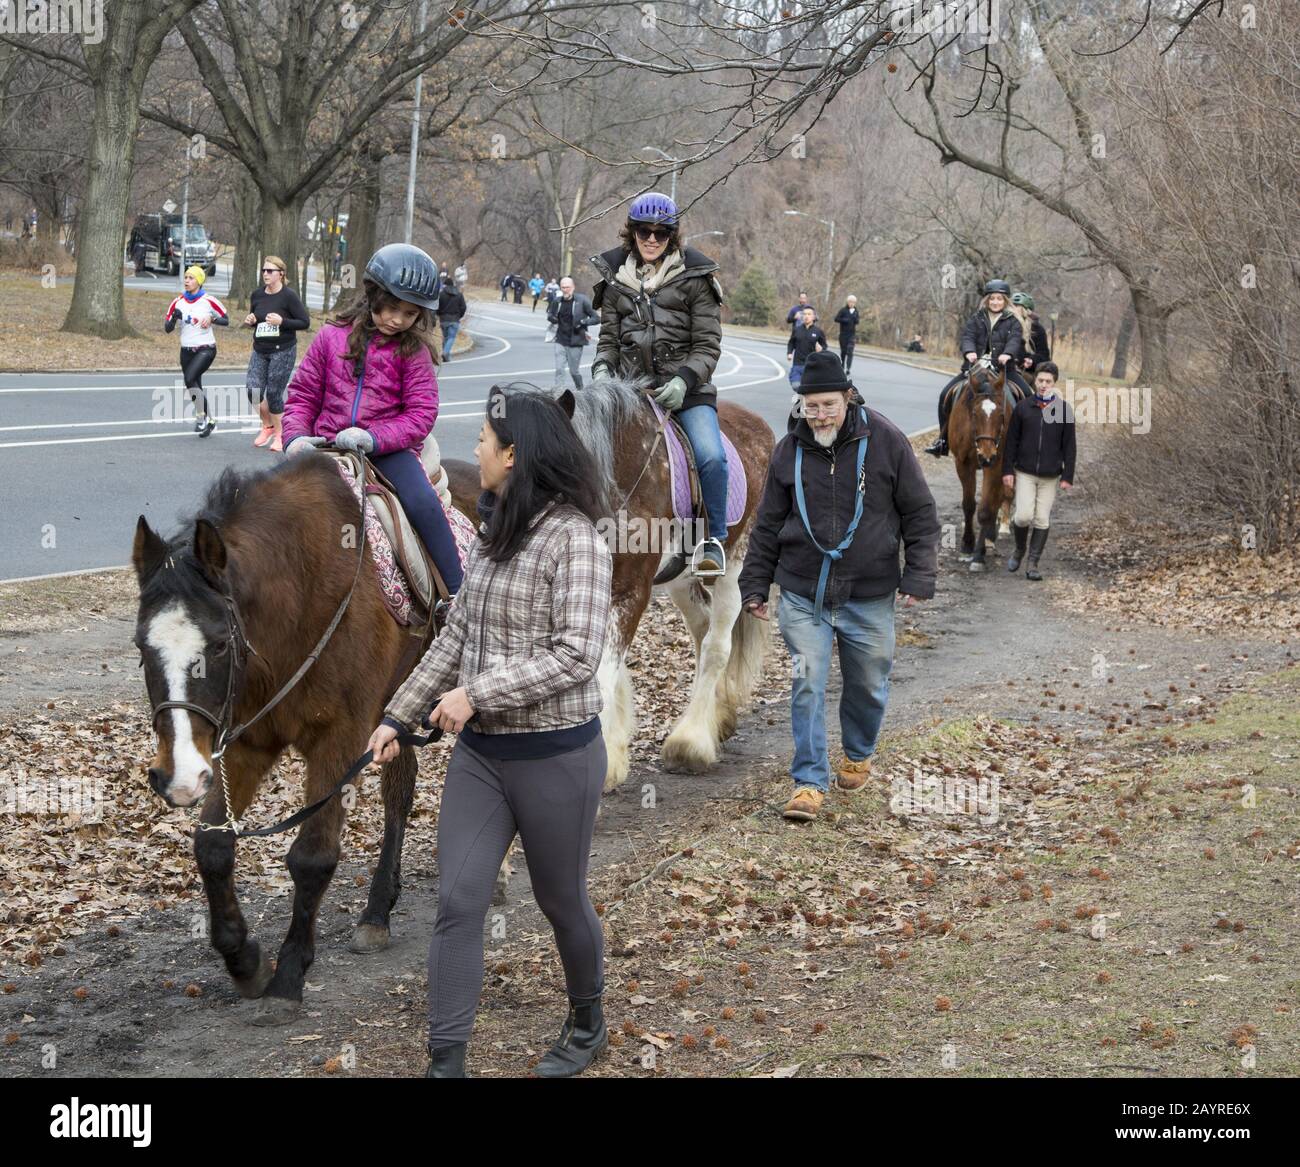 Horseback riders being led on a winter ride in Prospect Park, Brooklyn, New York. Stock Photo